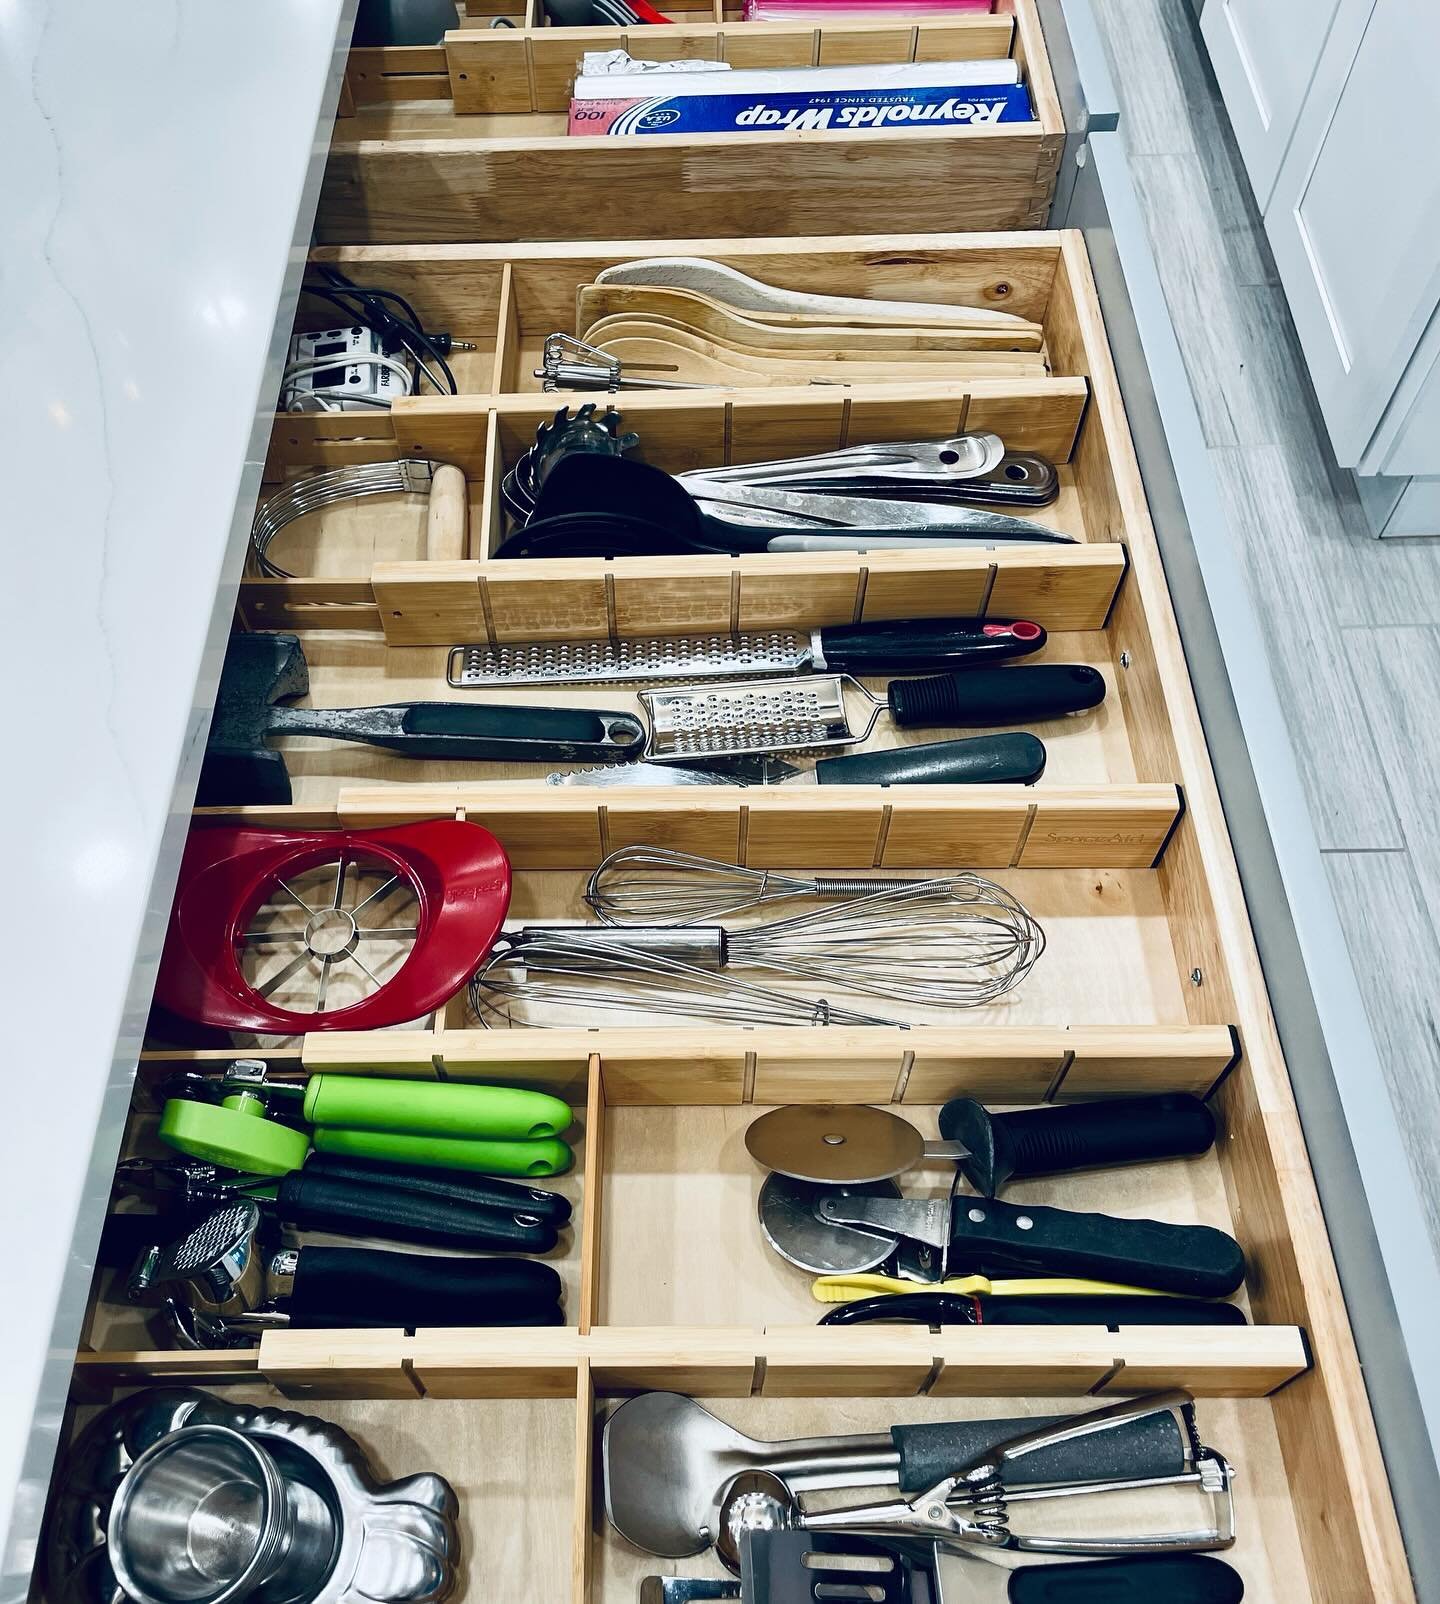 Nothing like starting the day with a little drawer organization inspiration! ✔️

👀Swipe to see different examples of styles, sizes..and you know, what other people keep in their drawers! 🤩 

As a child, I remember always being curious about what fr